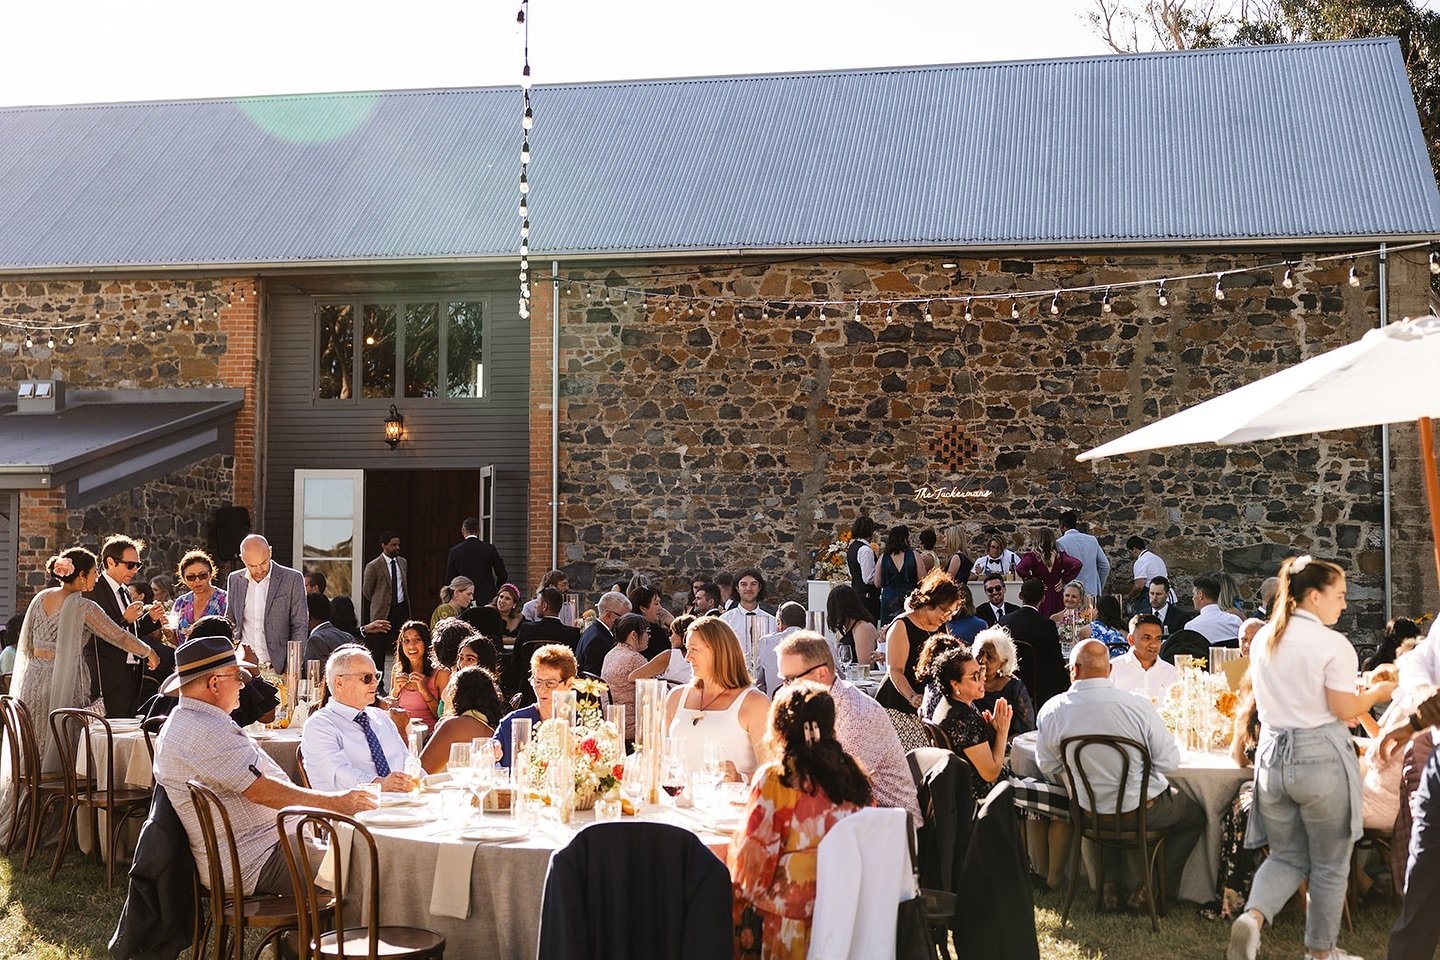 We&rsquo;re already missing those summer nights, when feasts could be enjoyed outside long into the evening ✨ 

@lu.and.lo_ 
@keira.nair 
@jessetuckerman 
@watertonhallwines 
@freyr.studio 
@janehillbridal 
@johncmccoy 
@sarahfrycelebrant 
@chloerose